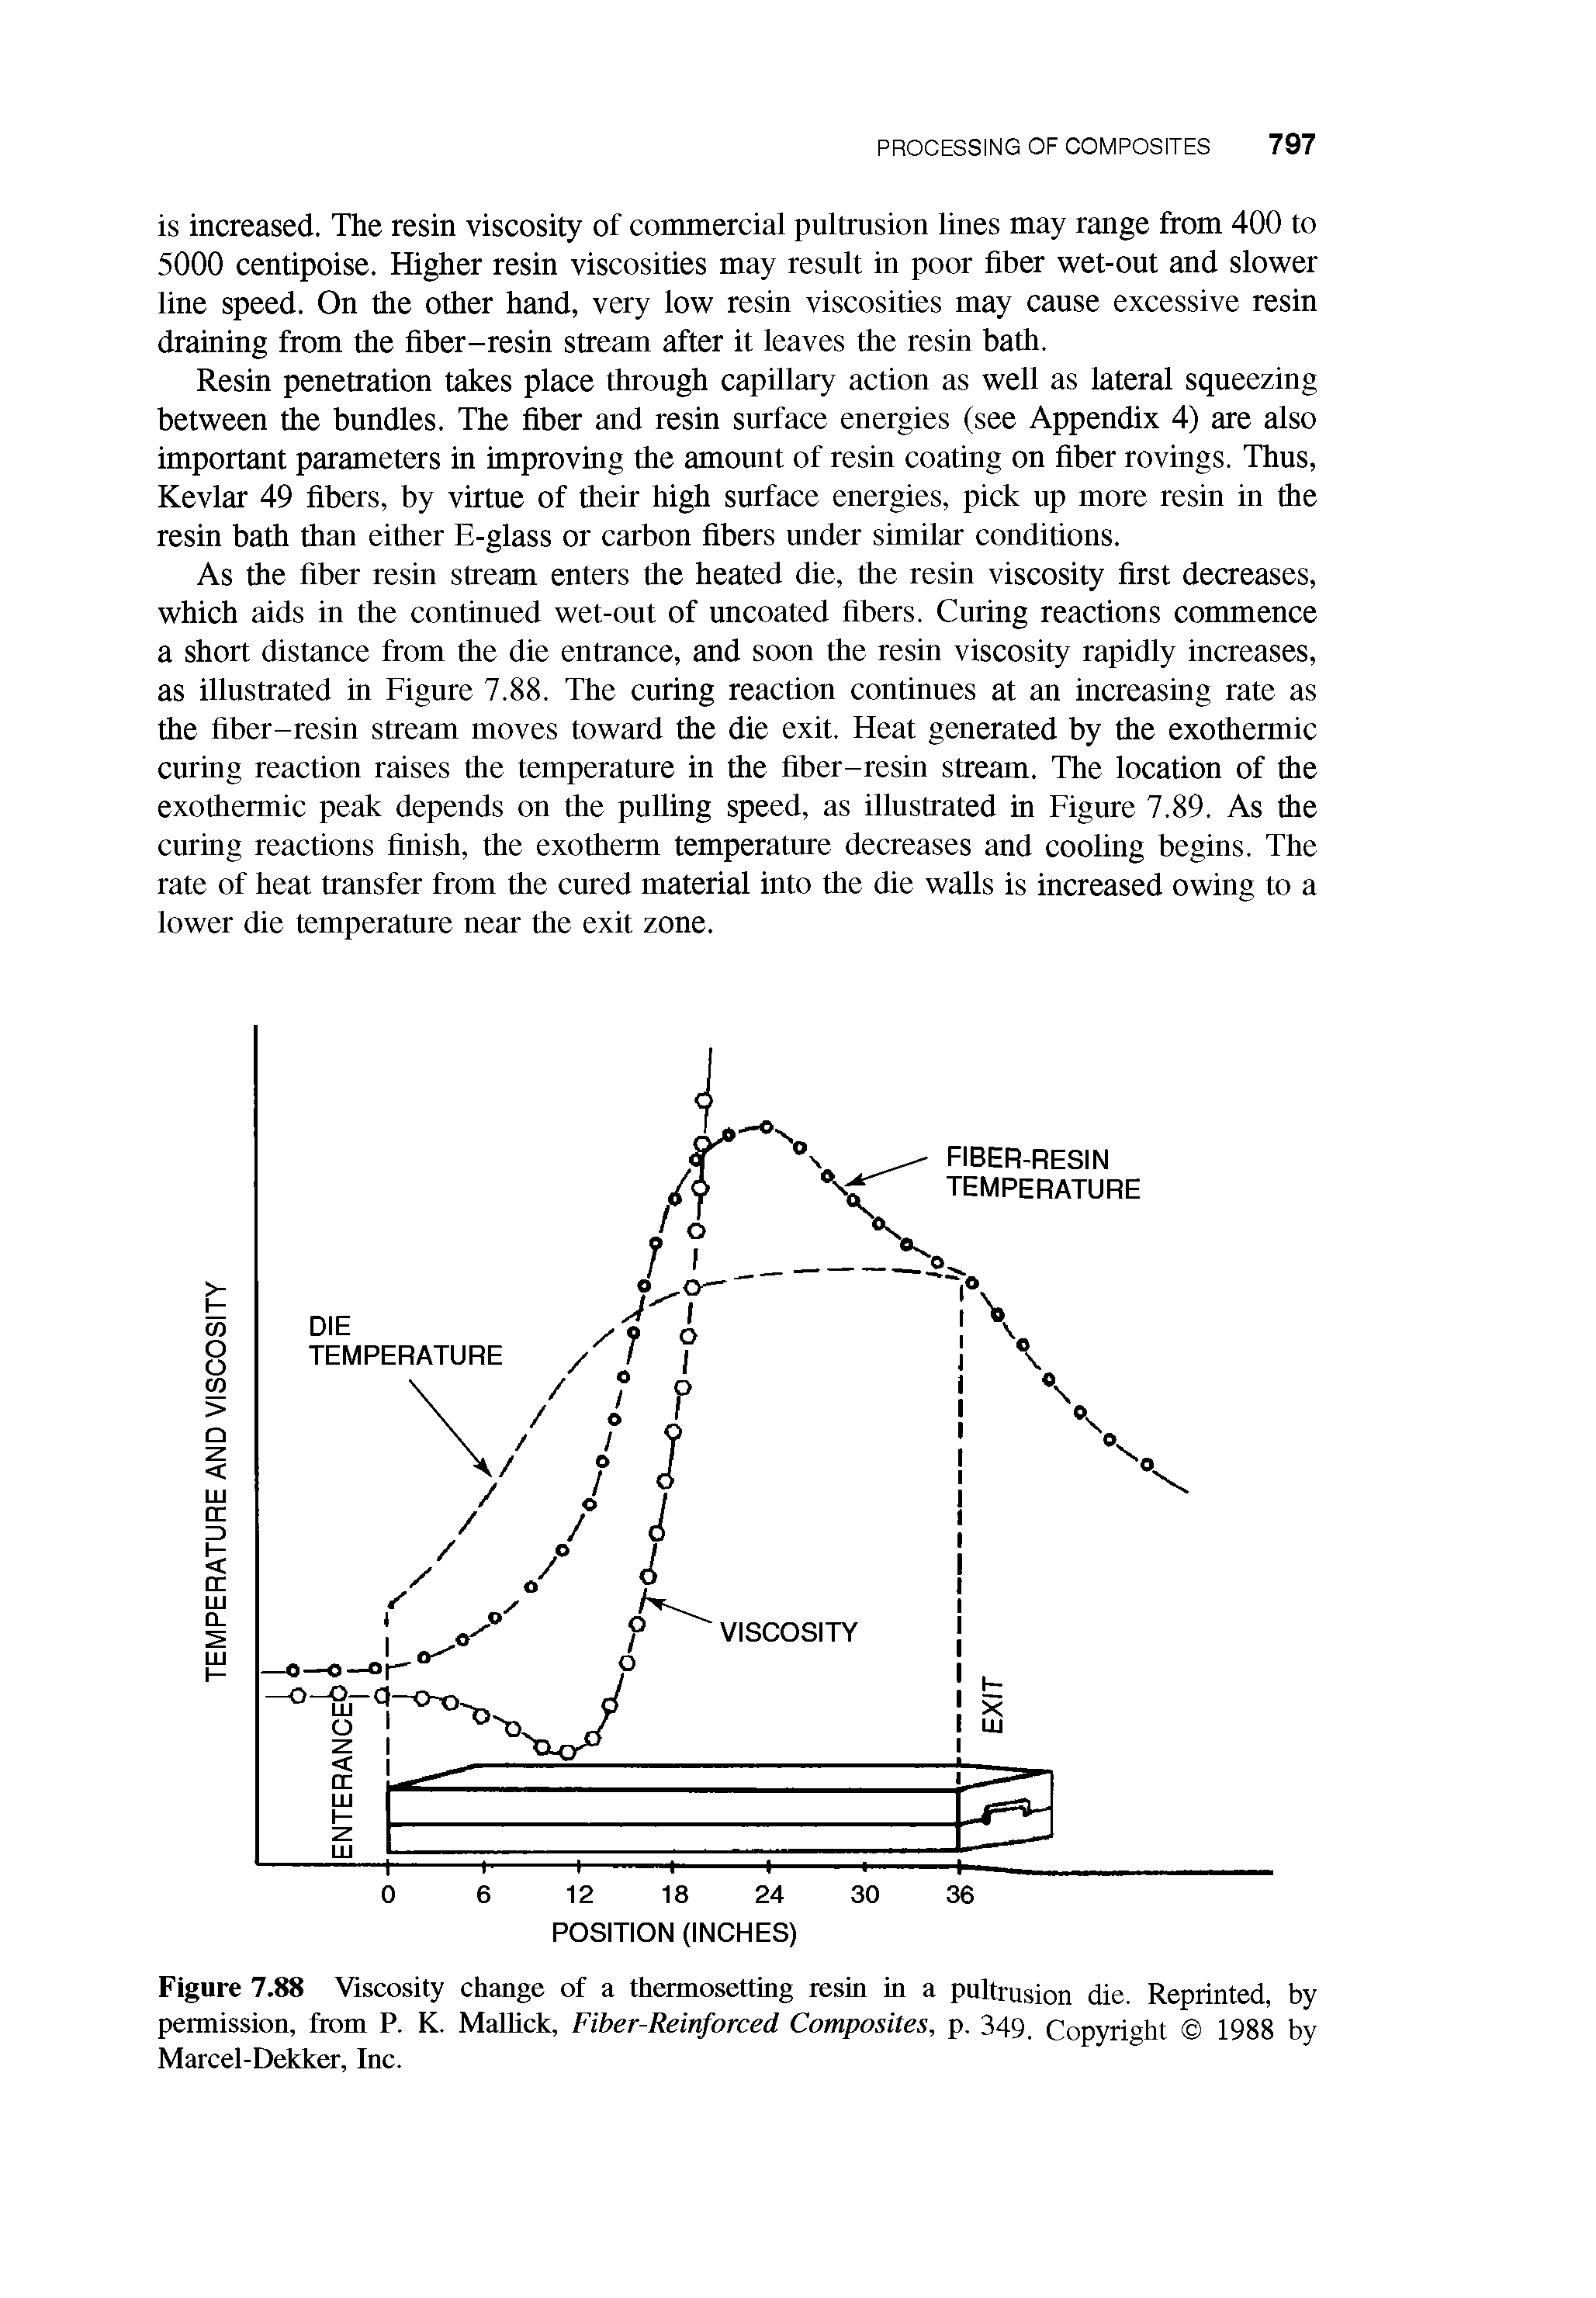 Figure 7.88 Viscosity change of a thermosetting resin in a pultrusion die. Reprinted, by permission, from P. K. Malhck, Fiber-Reinforced Composites, p. 349. Copyright 1988 by Marcel-Dekker, Inc.